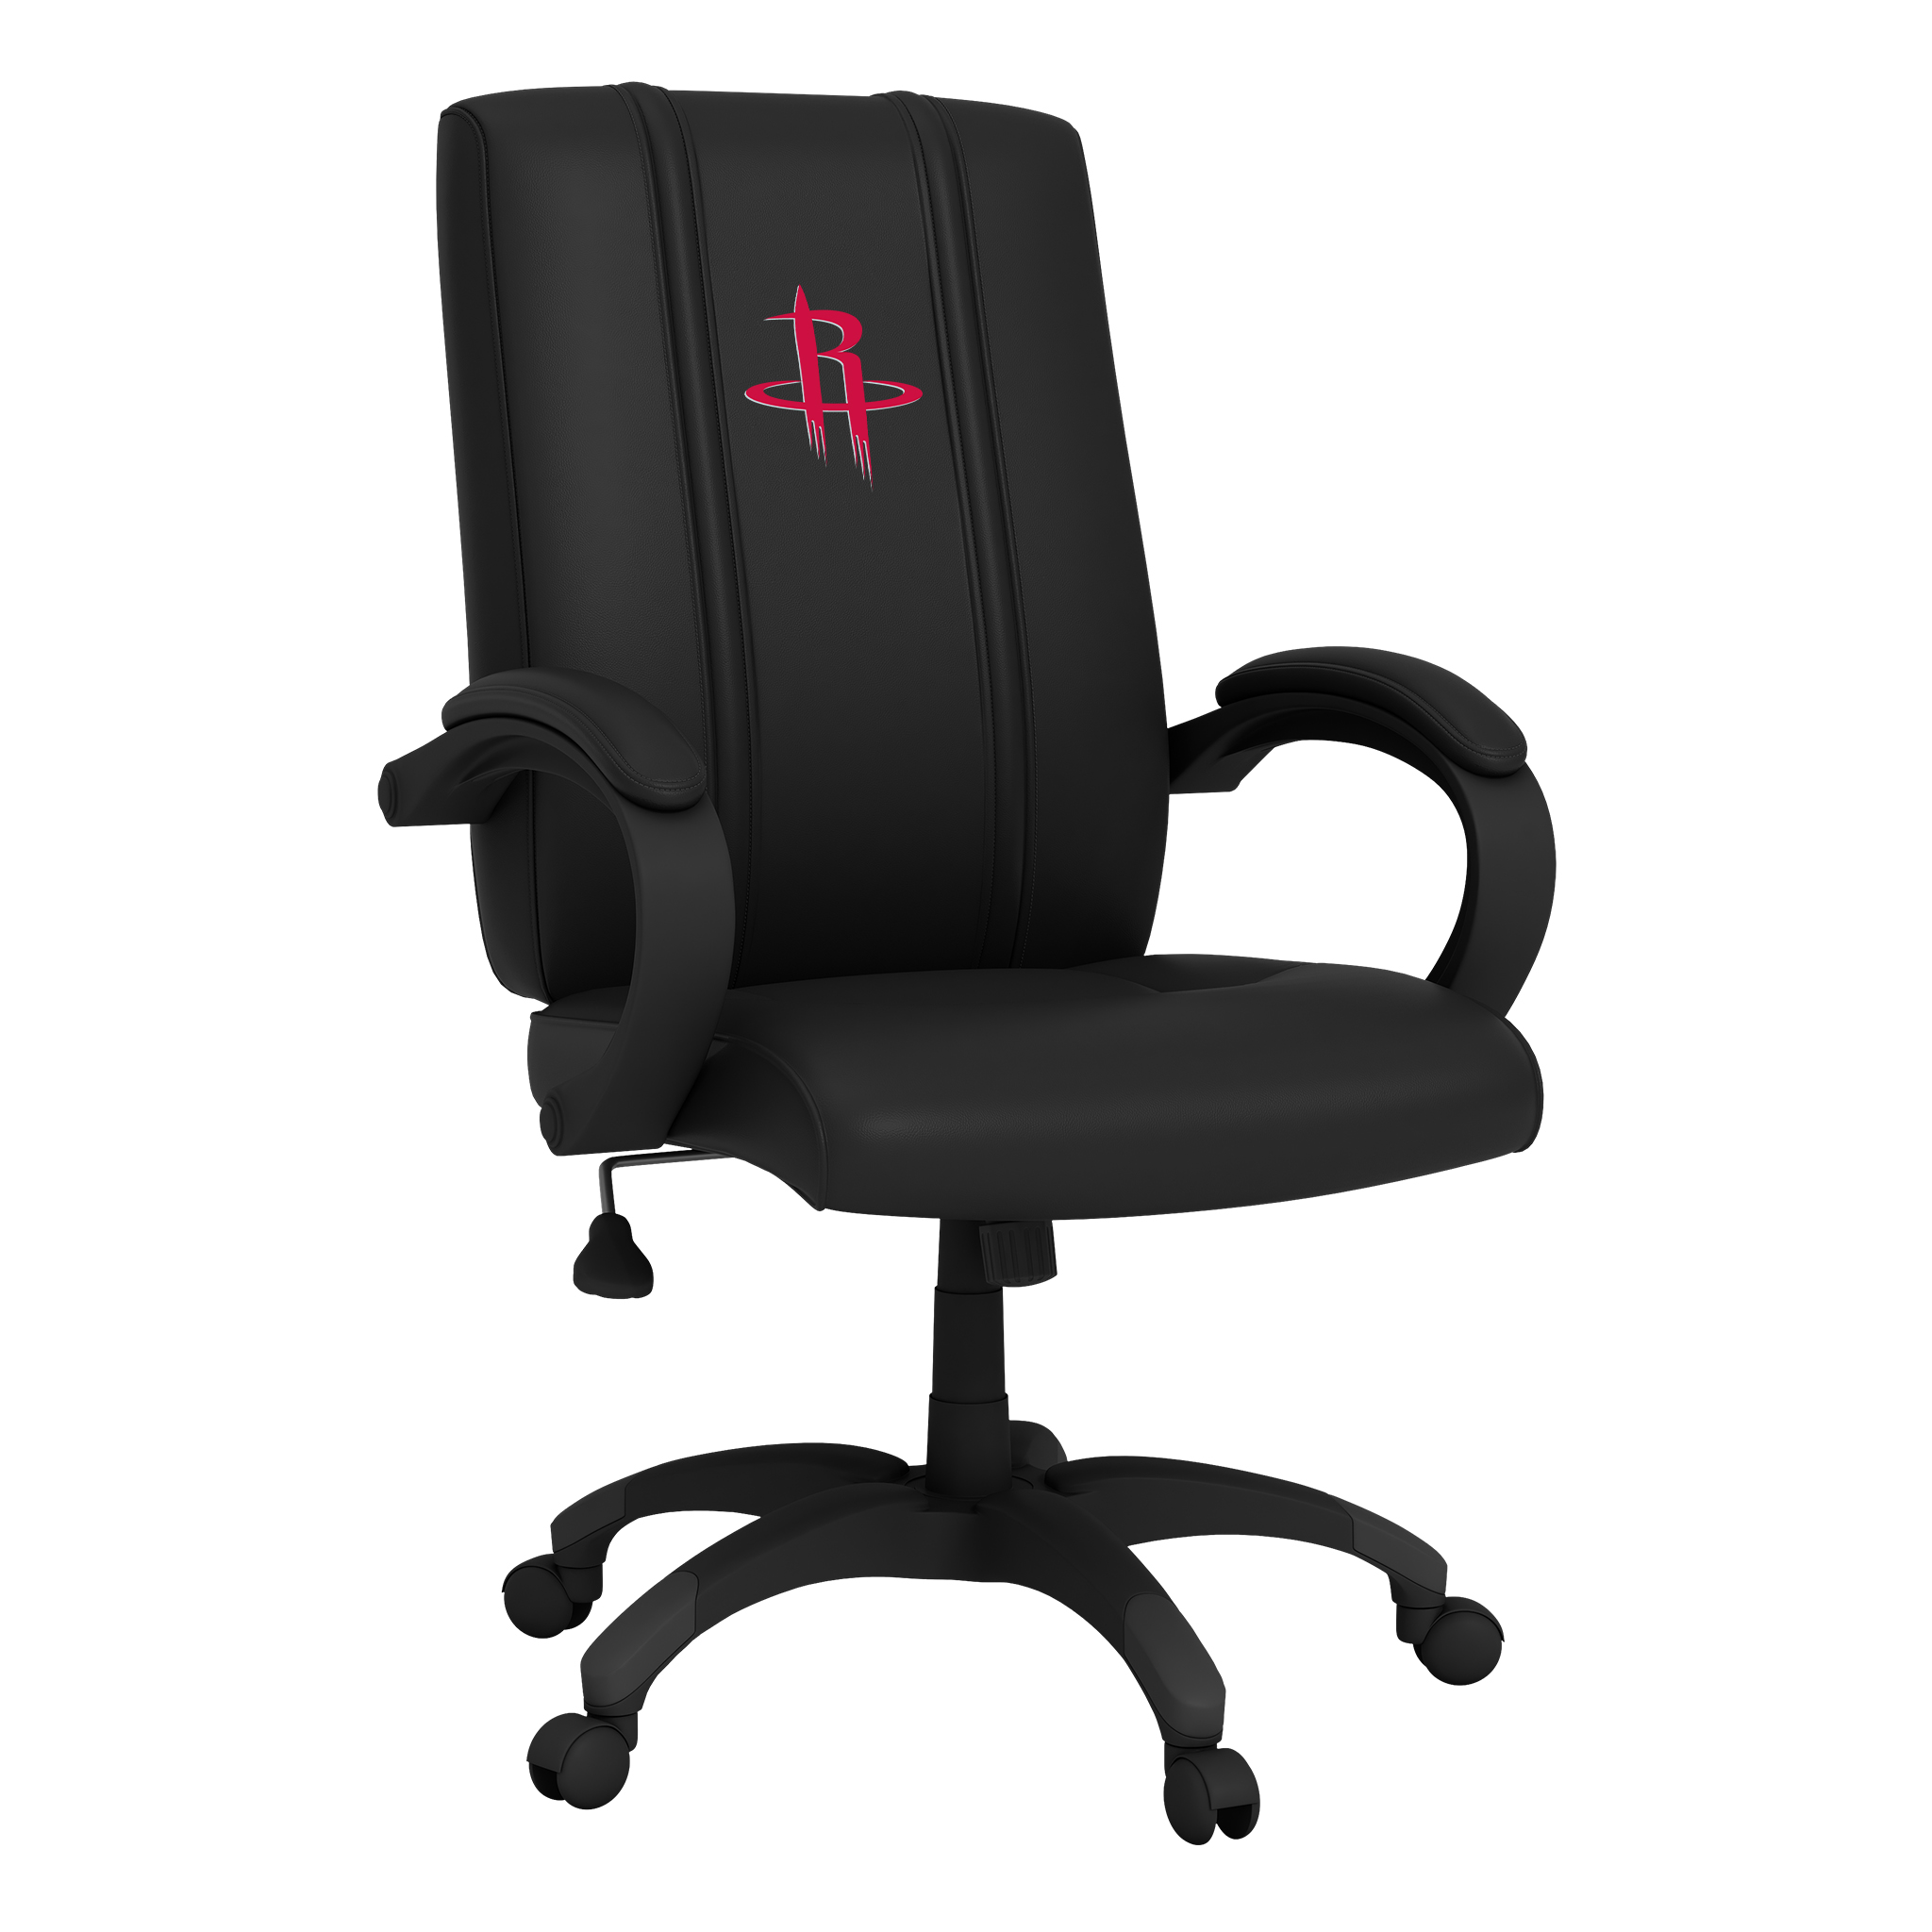 Houston Rockets Office Chair 1000 with Houston Rockets Logo